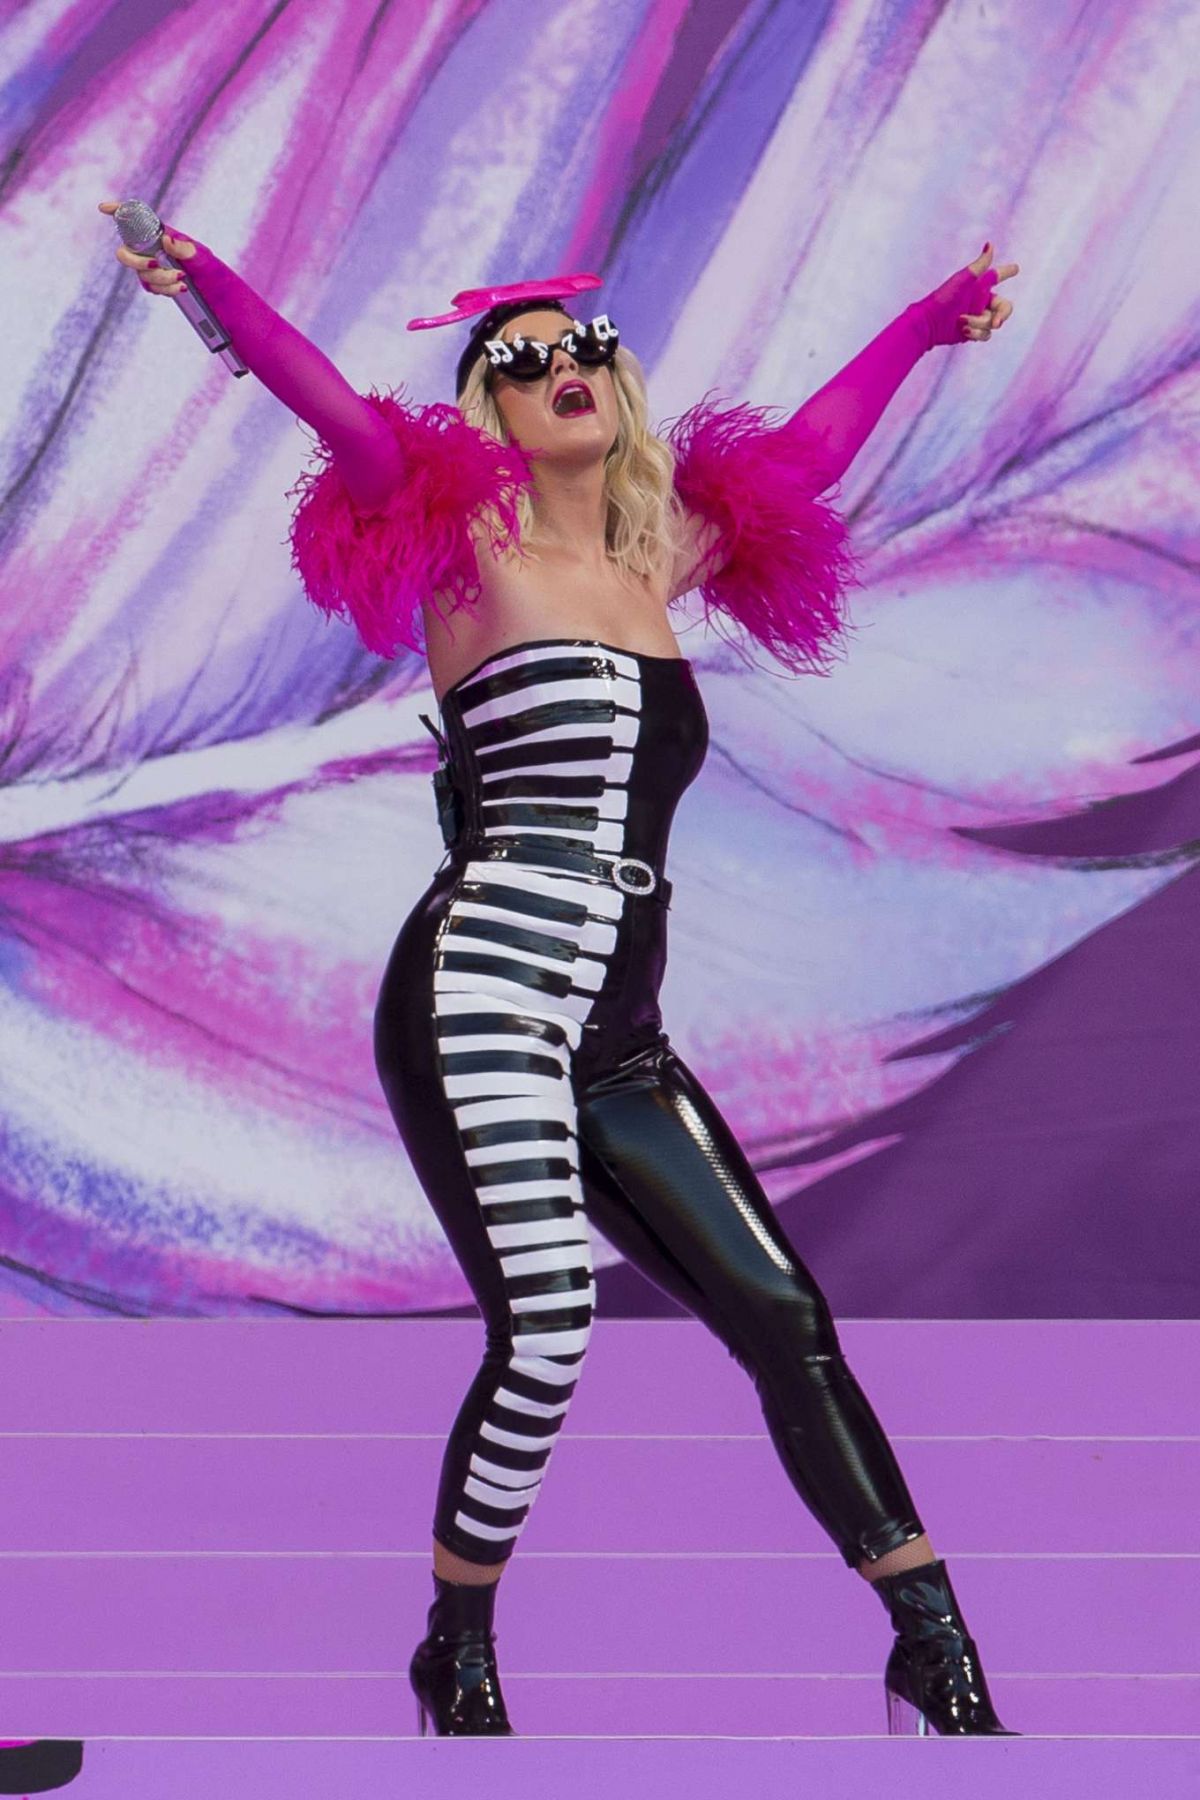 katy-perry-performs-at-2019-new-orleans-jazz-heritage-festival-50th-anniversary-04-27-2019-2.jpg